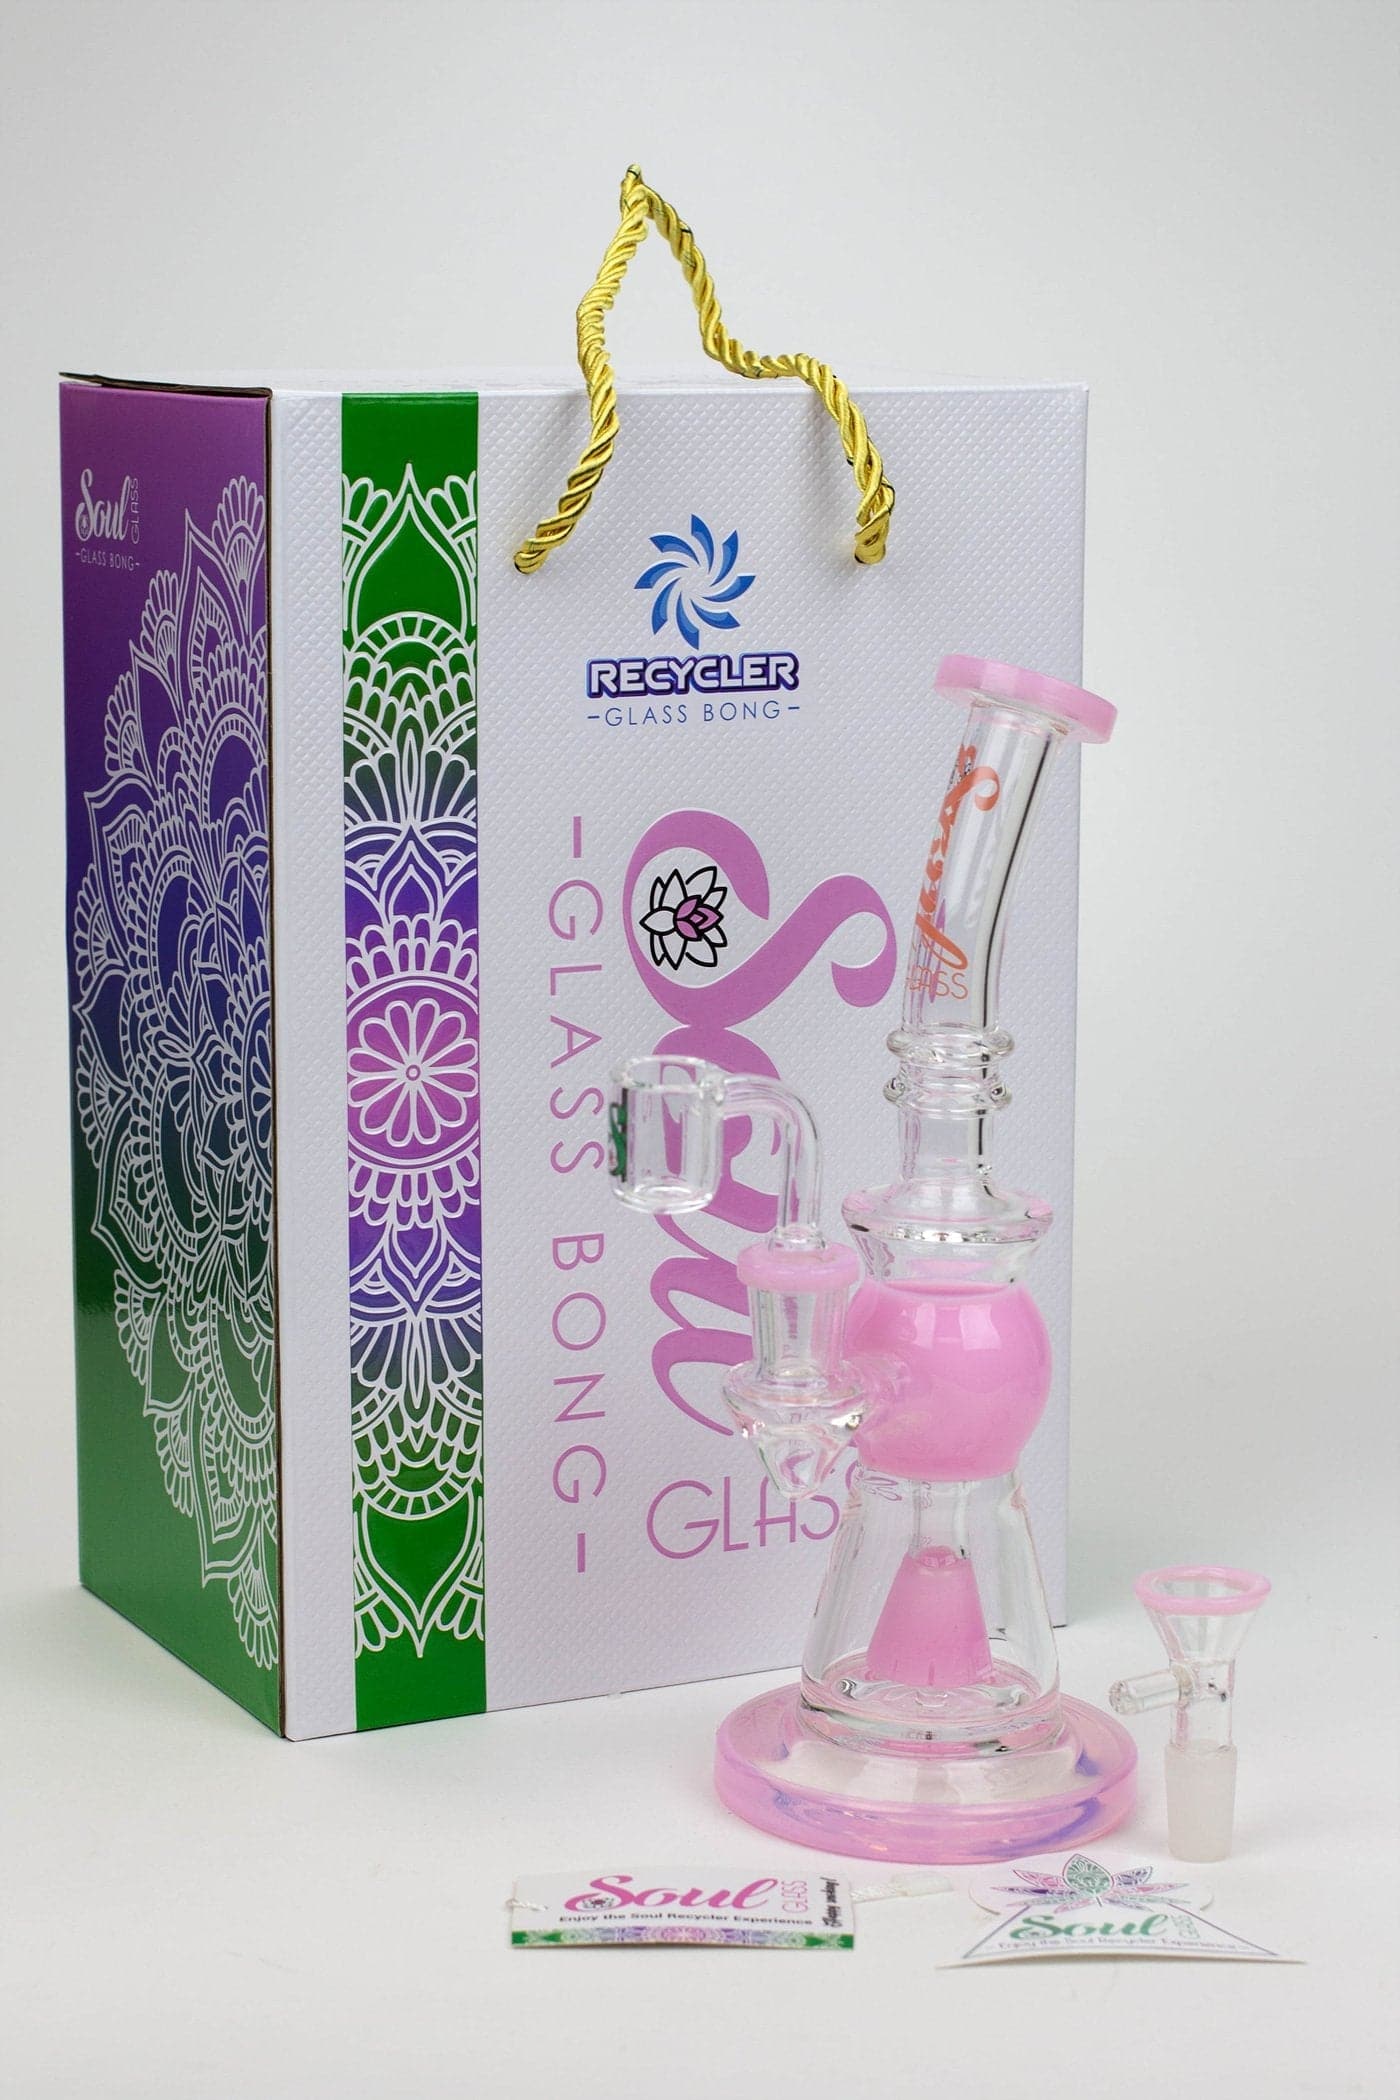 Soul glass 2-in-1 cone diffuser glass water pipes_5